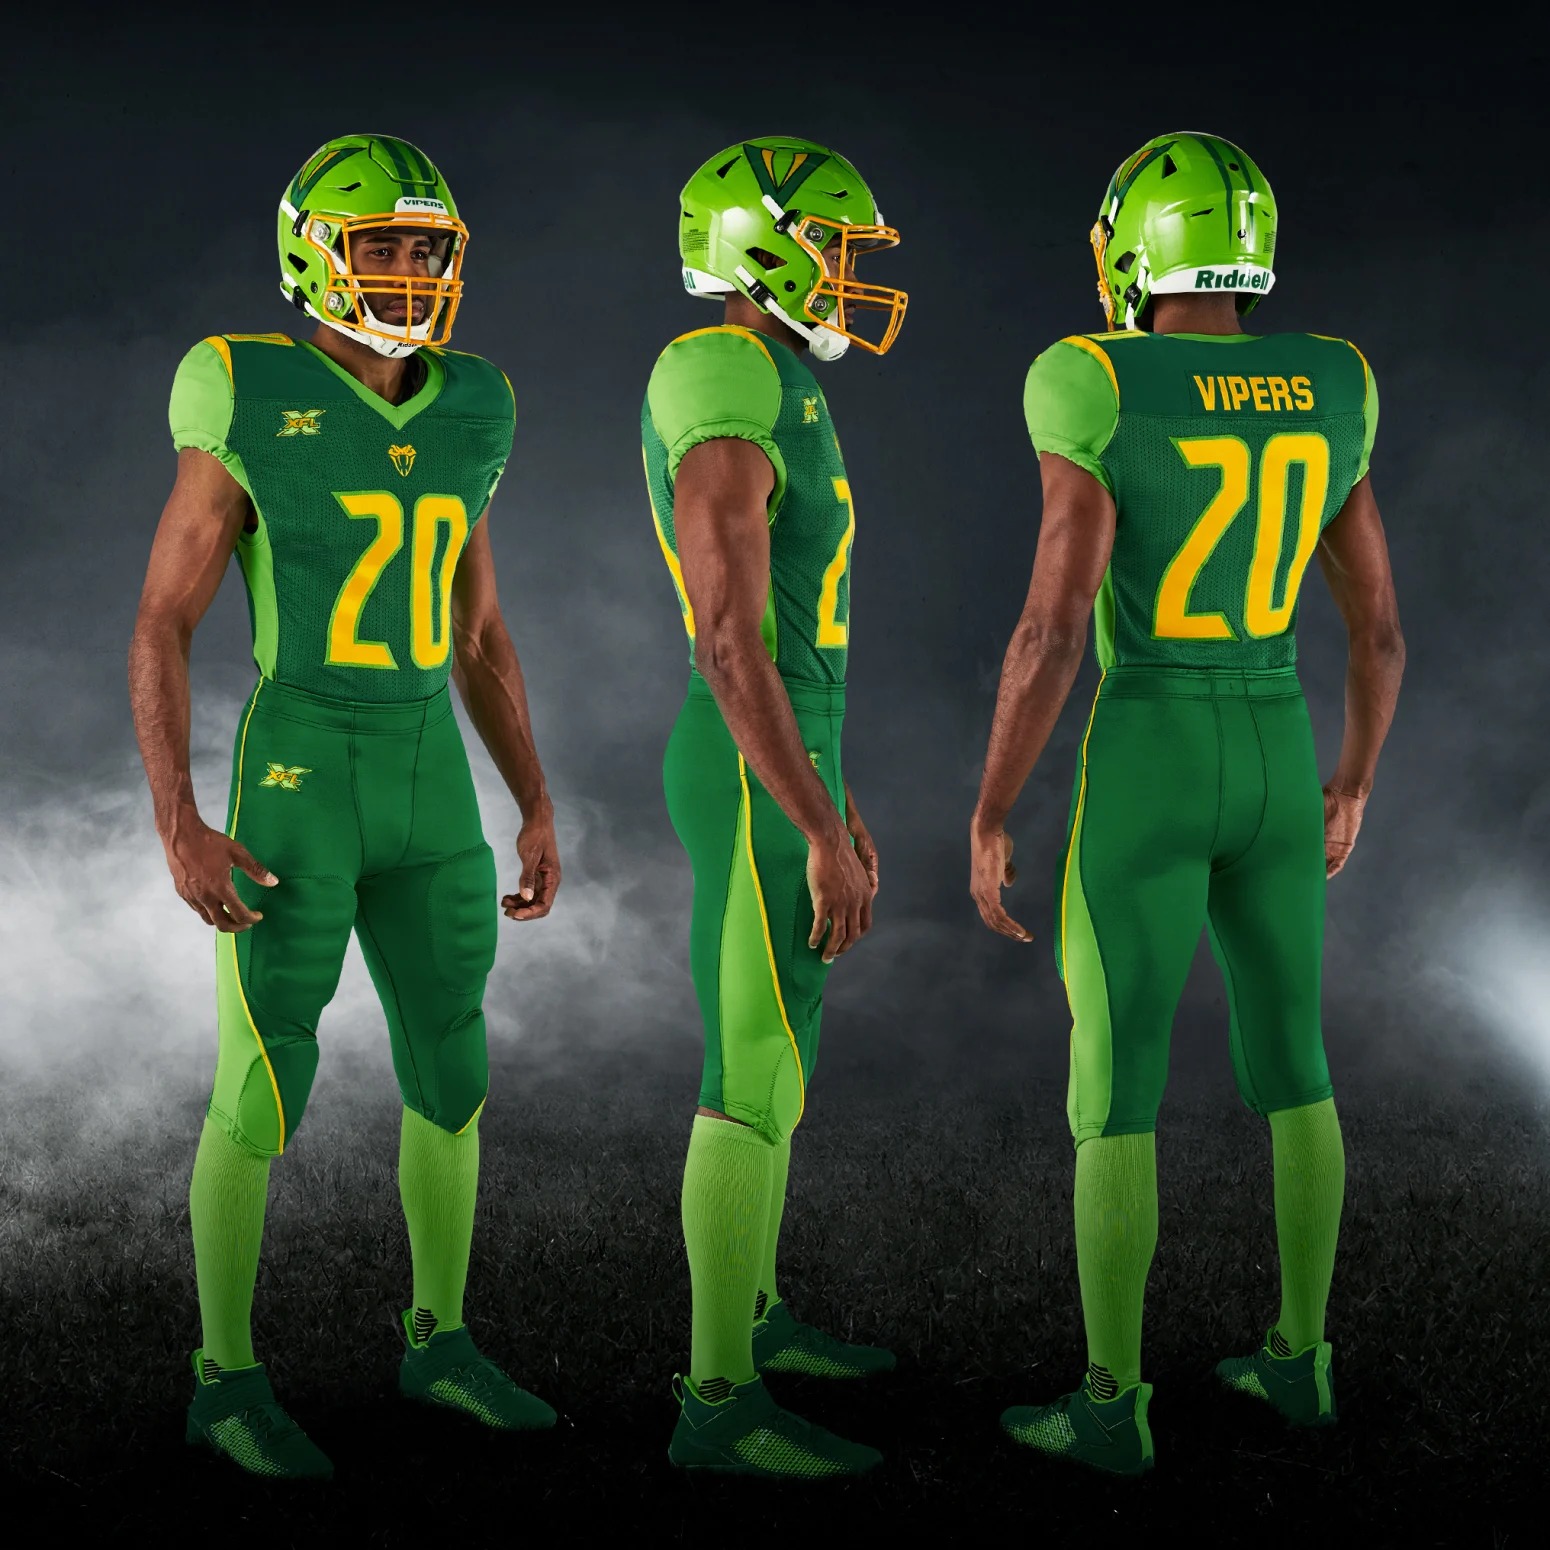 Seattle Dragons unveil XFL uniforms, which get thumbs up from two players